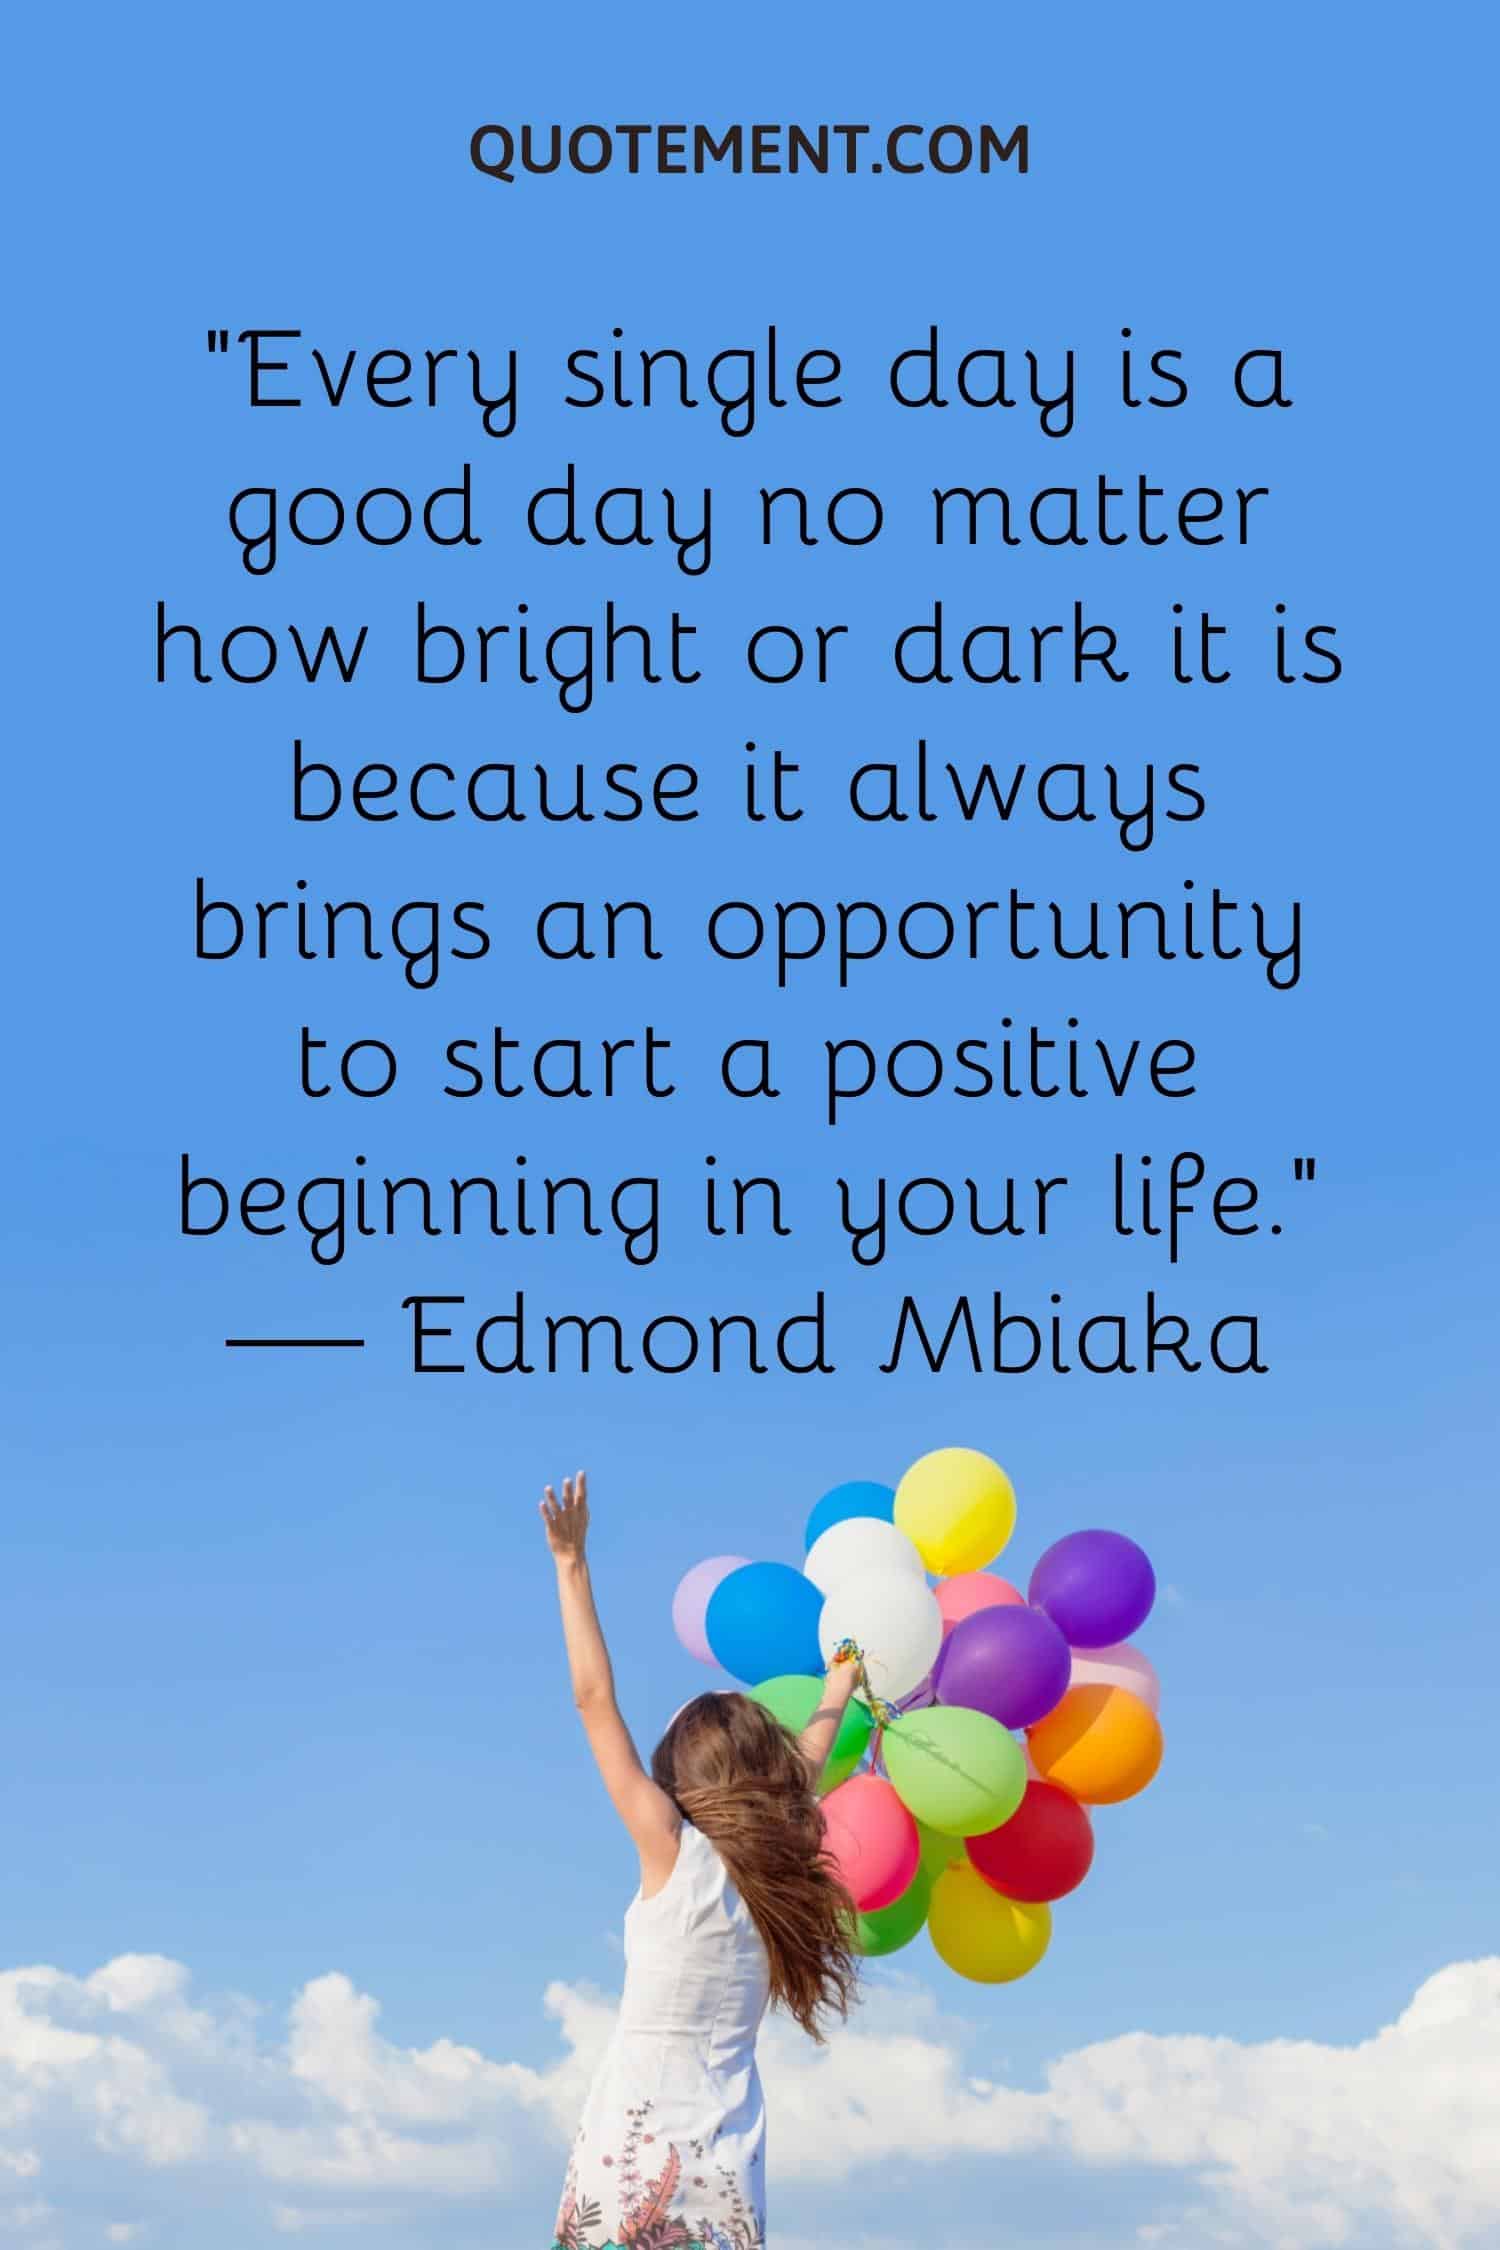 Every single day is a good day no matter how bright or dark it is because it always brings an opportunity to start a positive beginning in your life